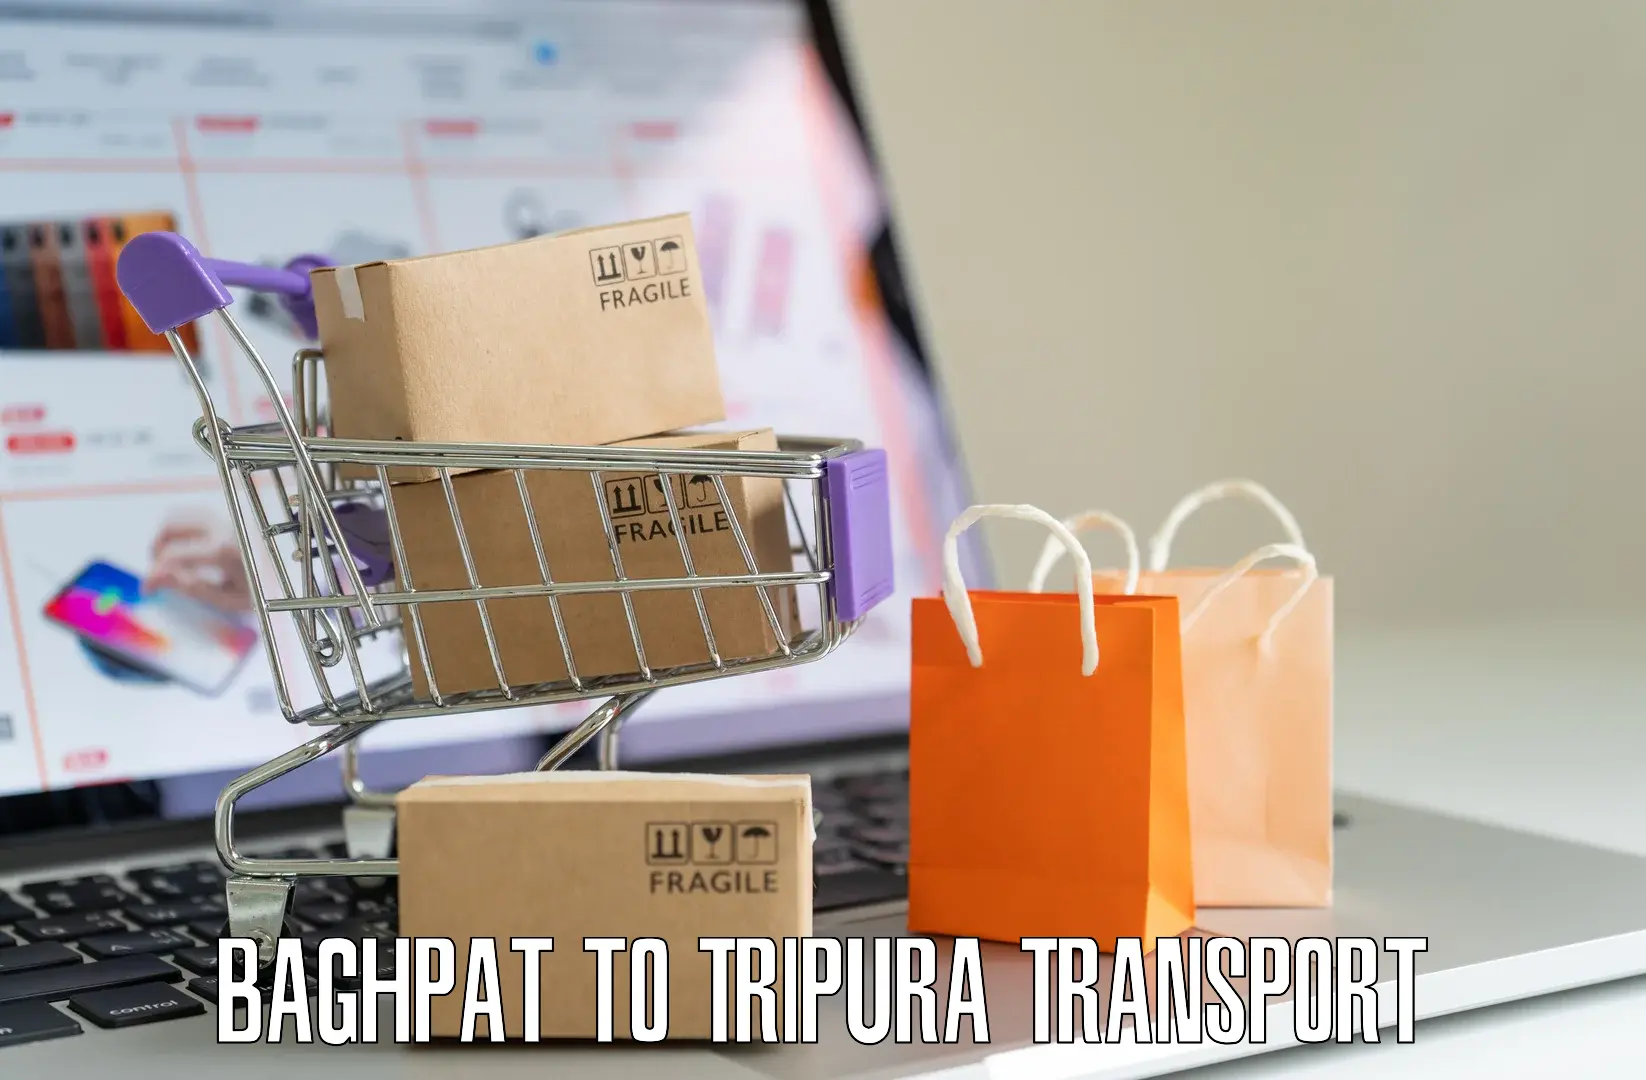 Air freight transport services Baghpat to Udaipur Tripura